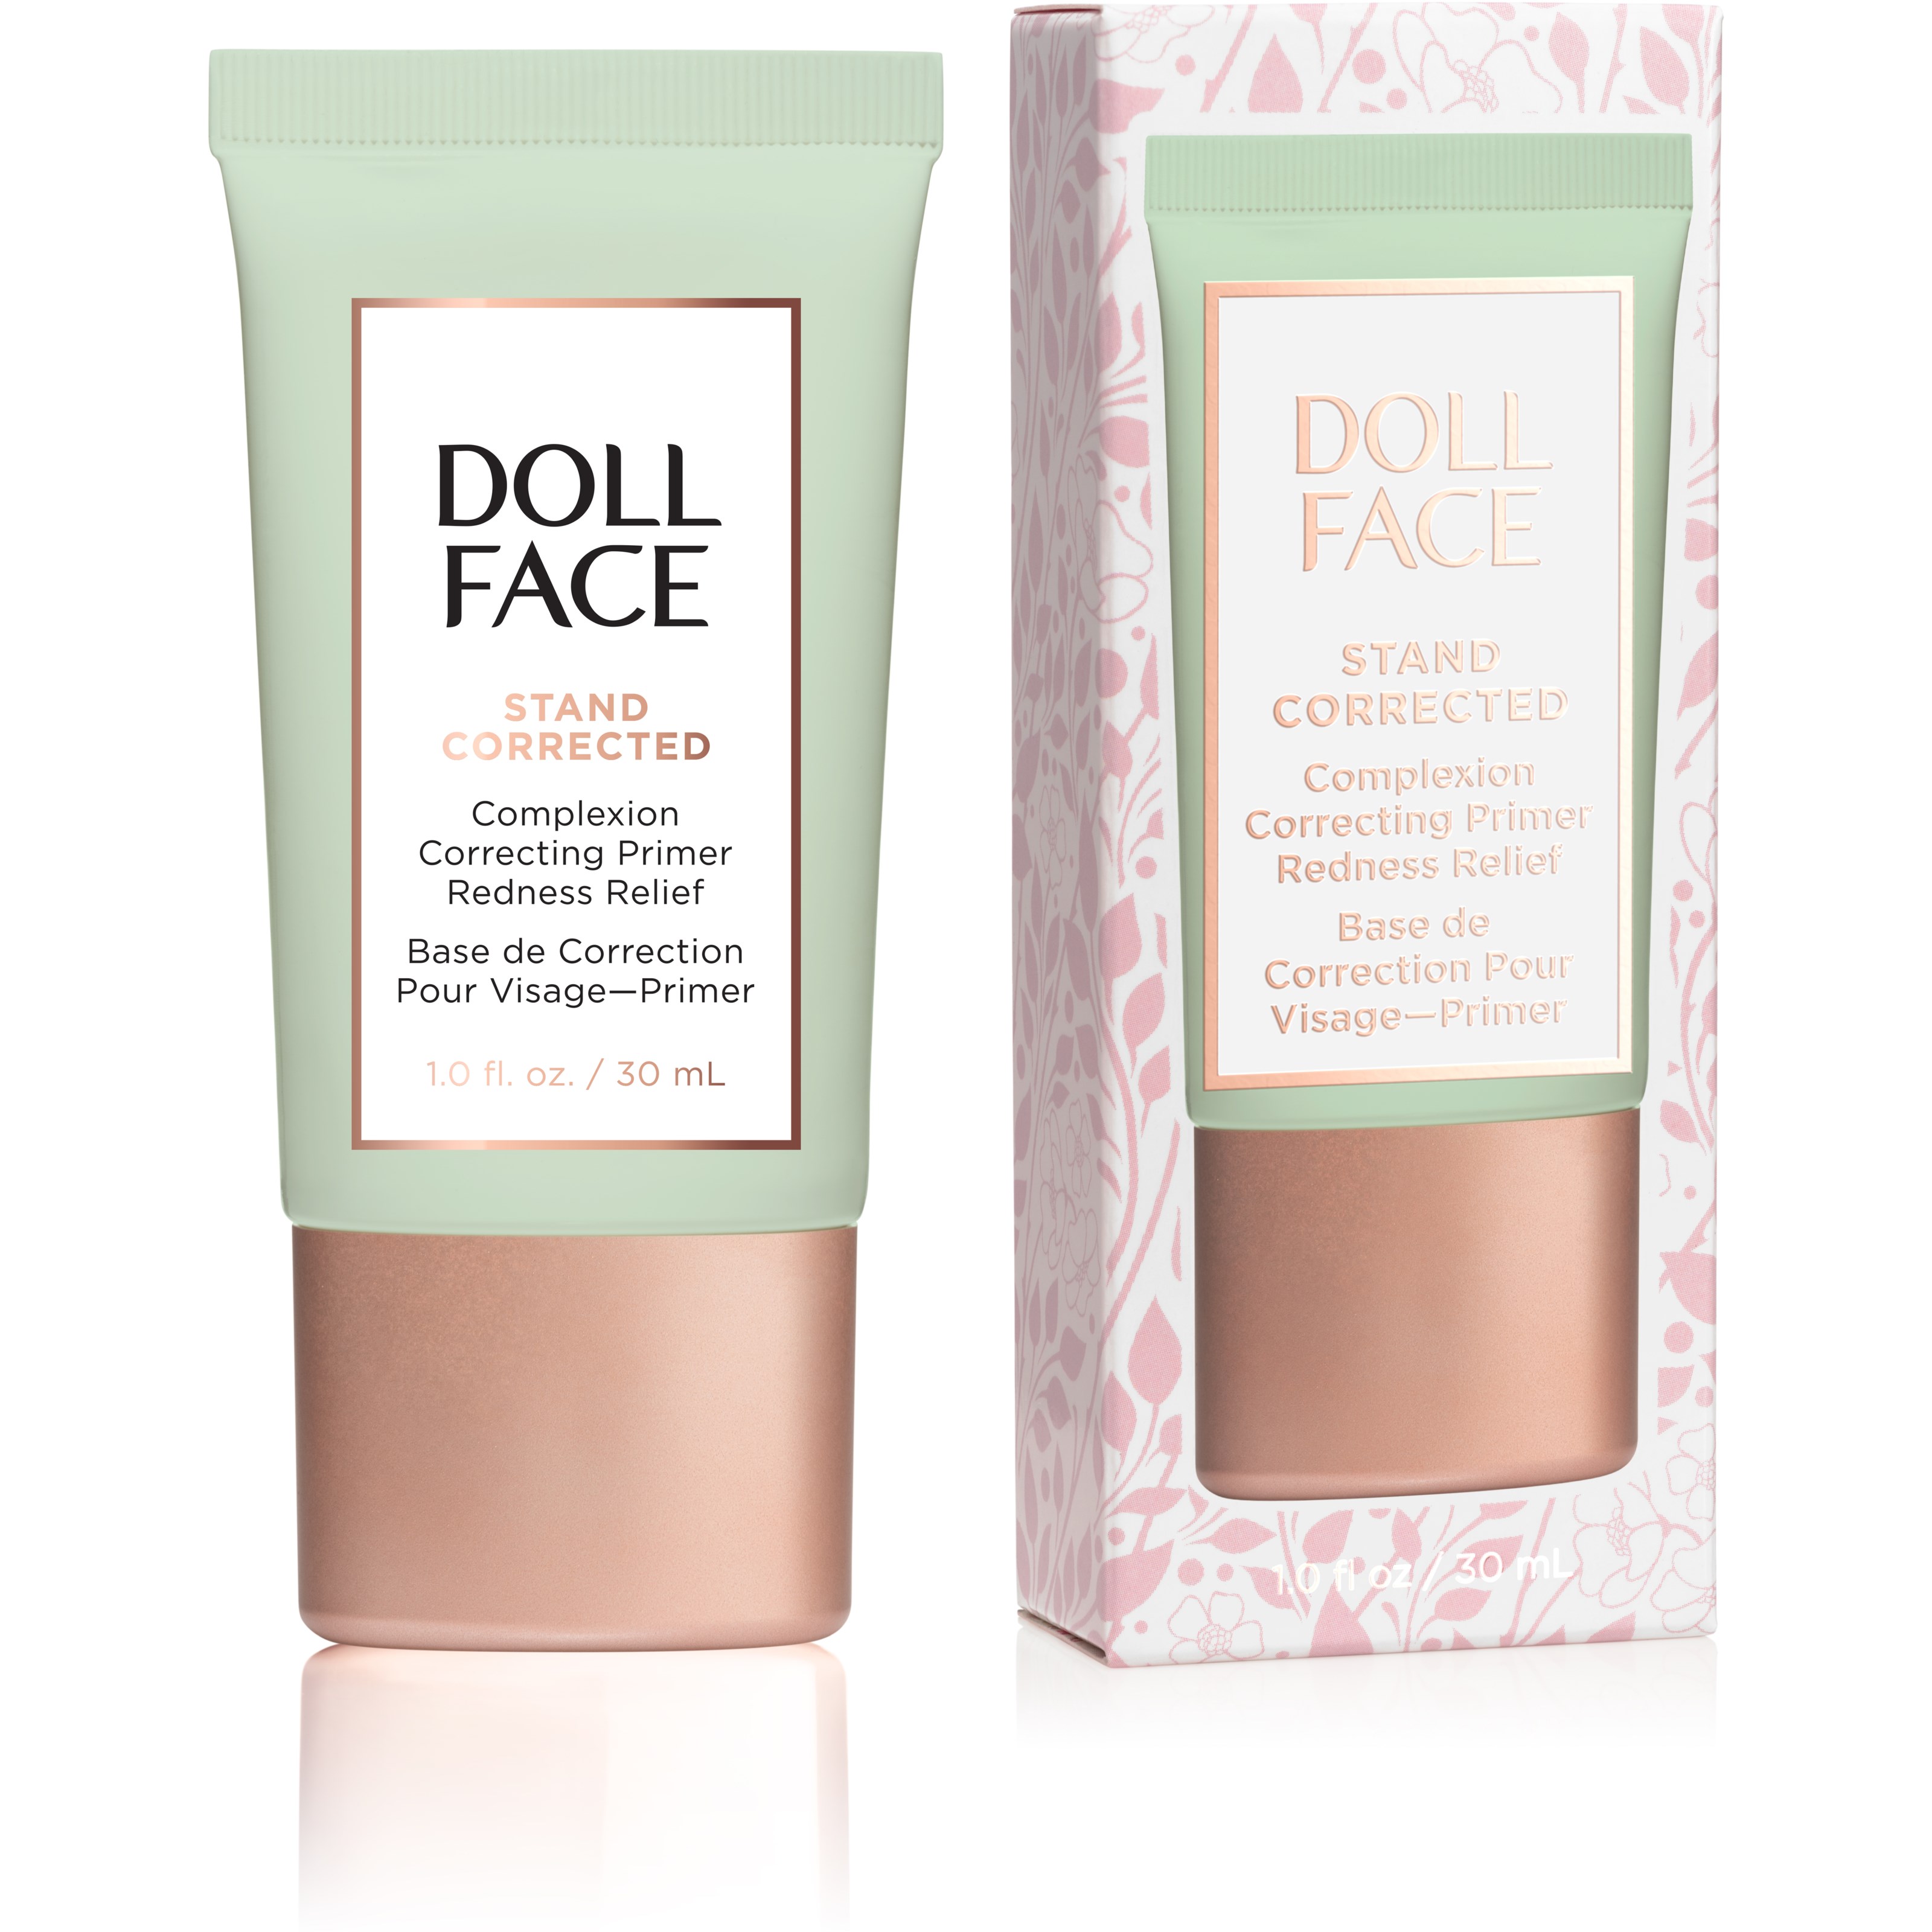 Bilde av Doll Face Stand Corrected Complexion Equalizer